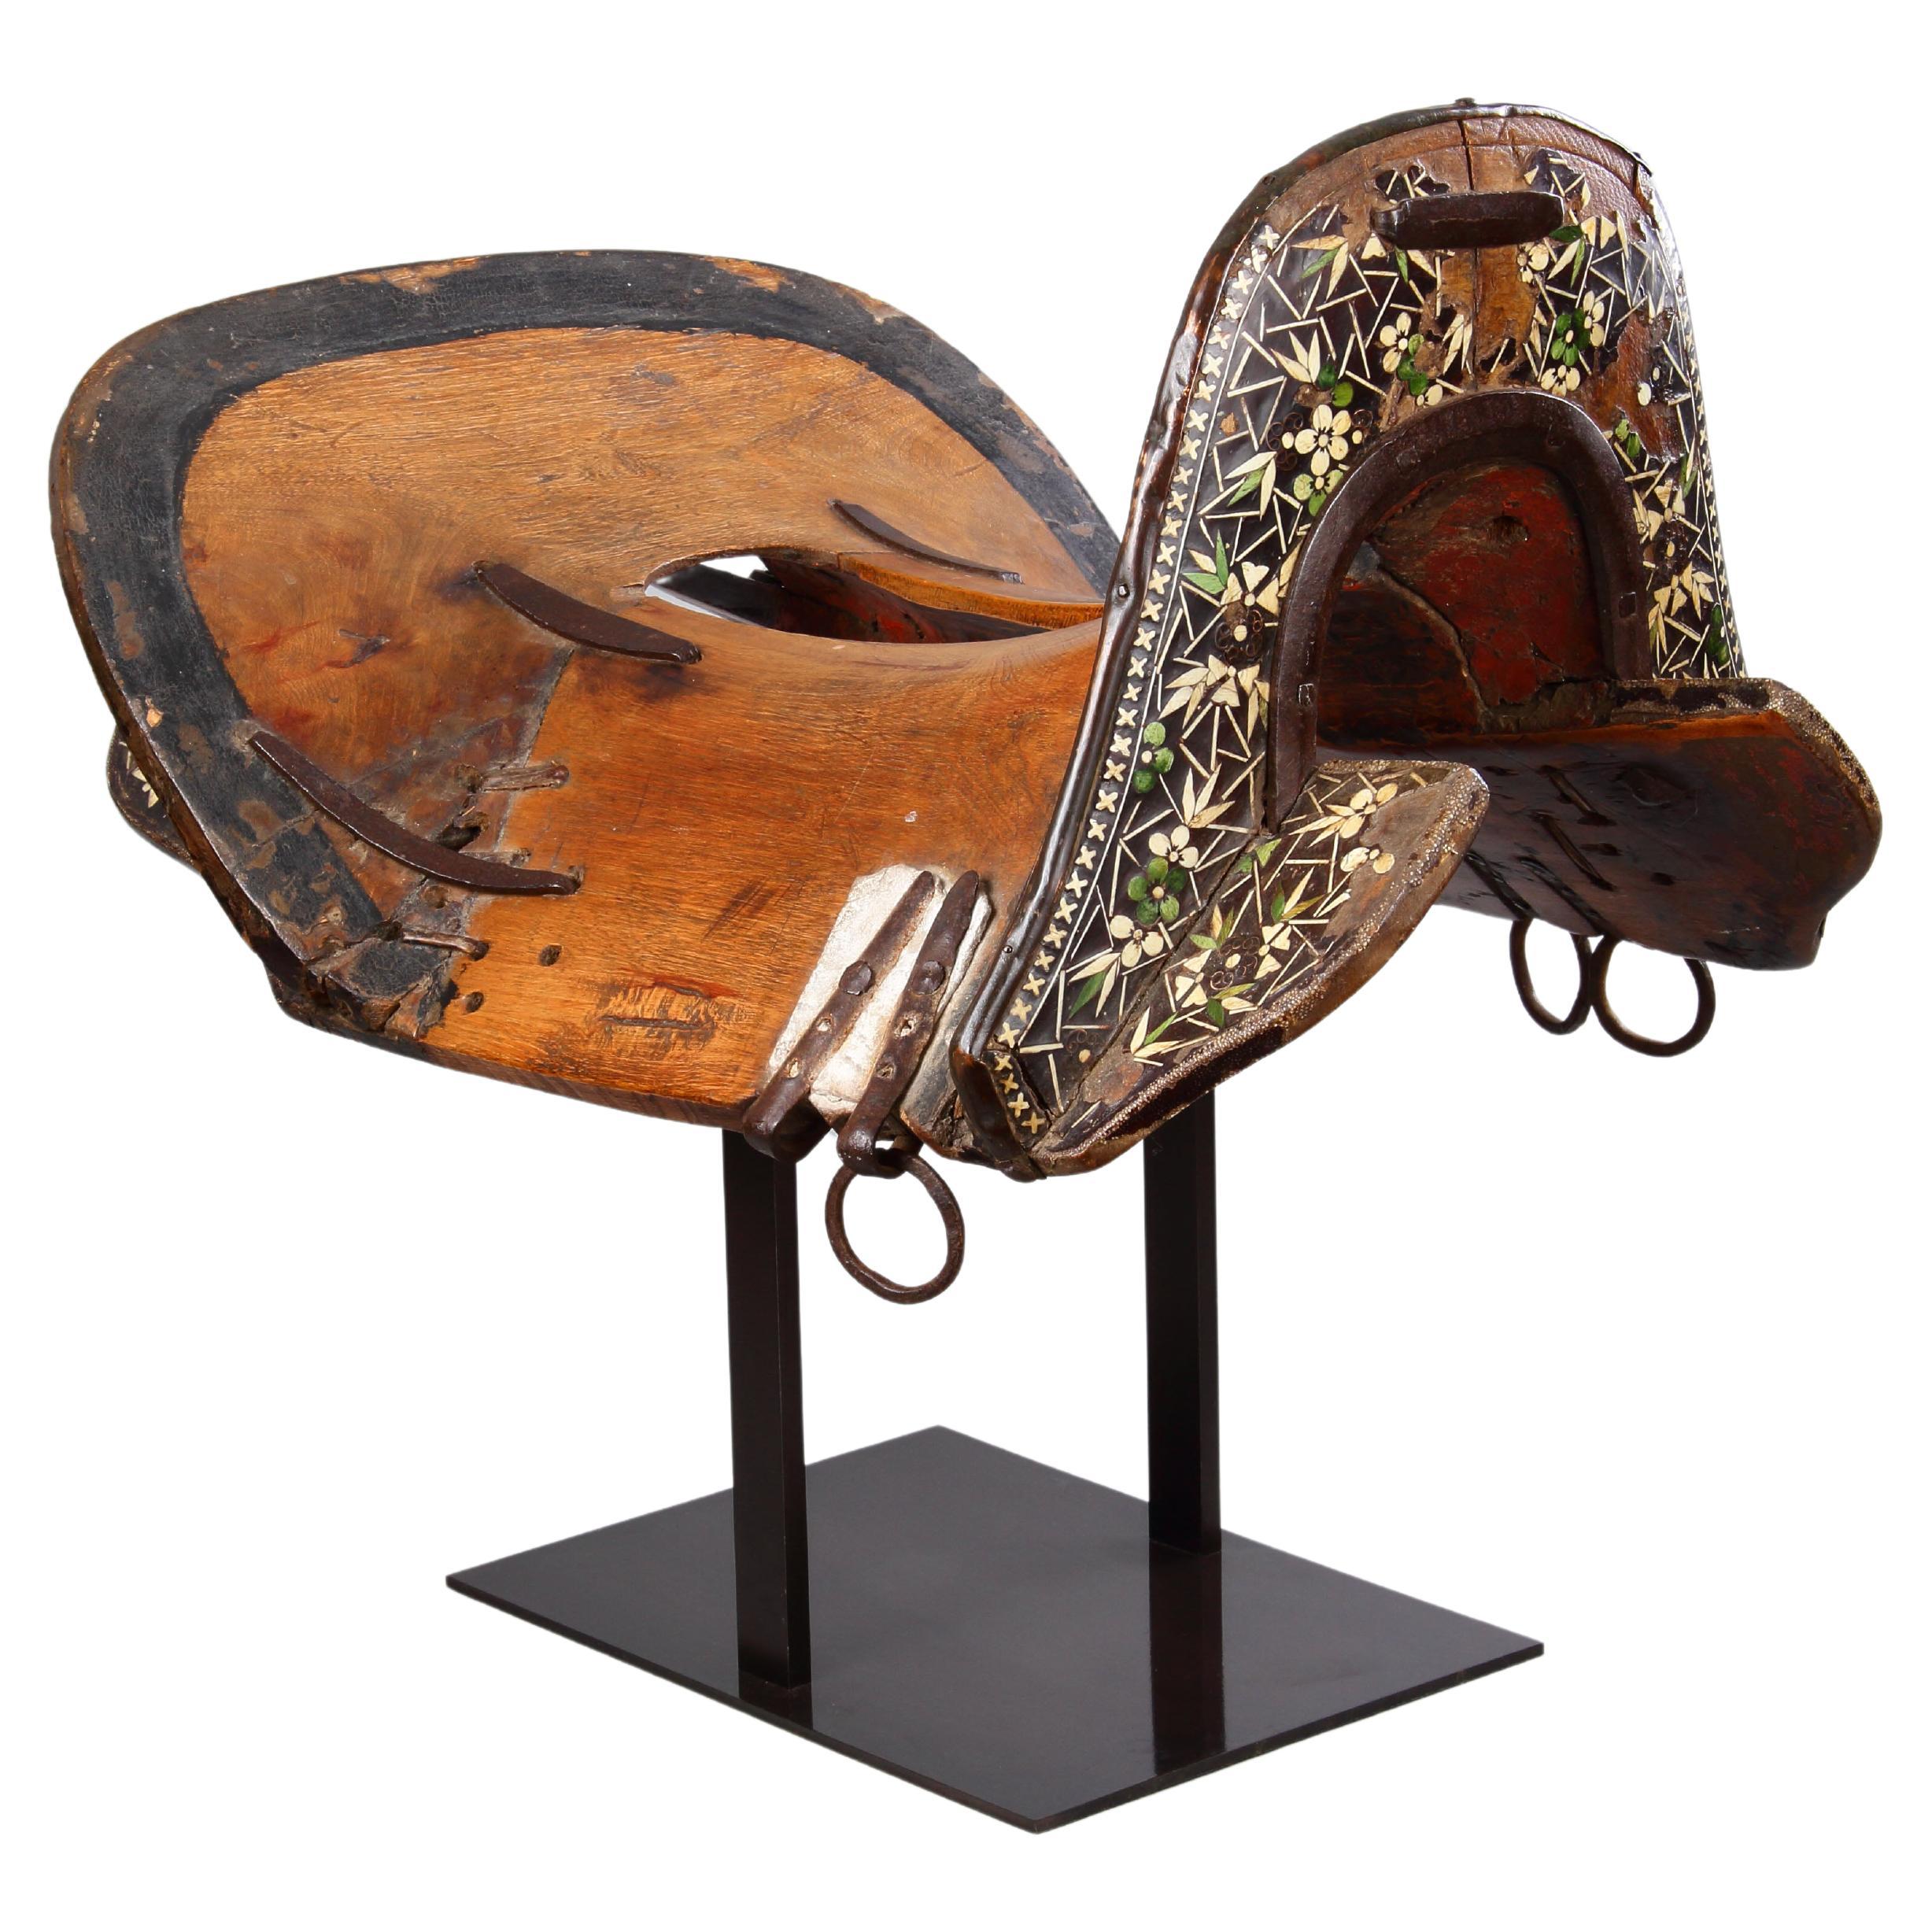 A Rare Western Tibetan Horse Saddle as Used by the Kampa Horsemen For Sale